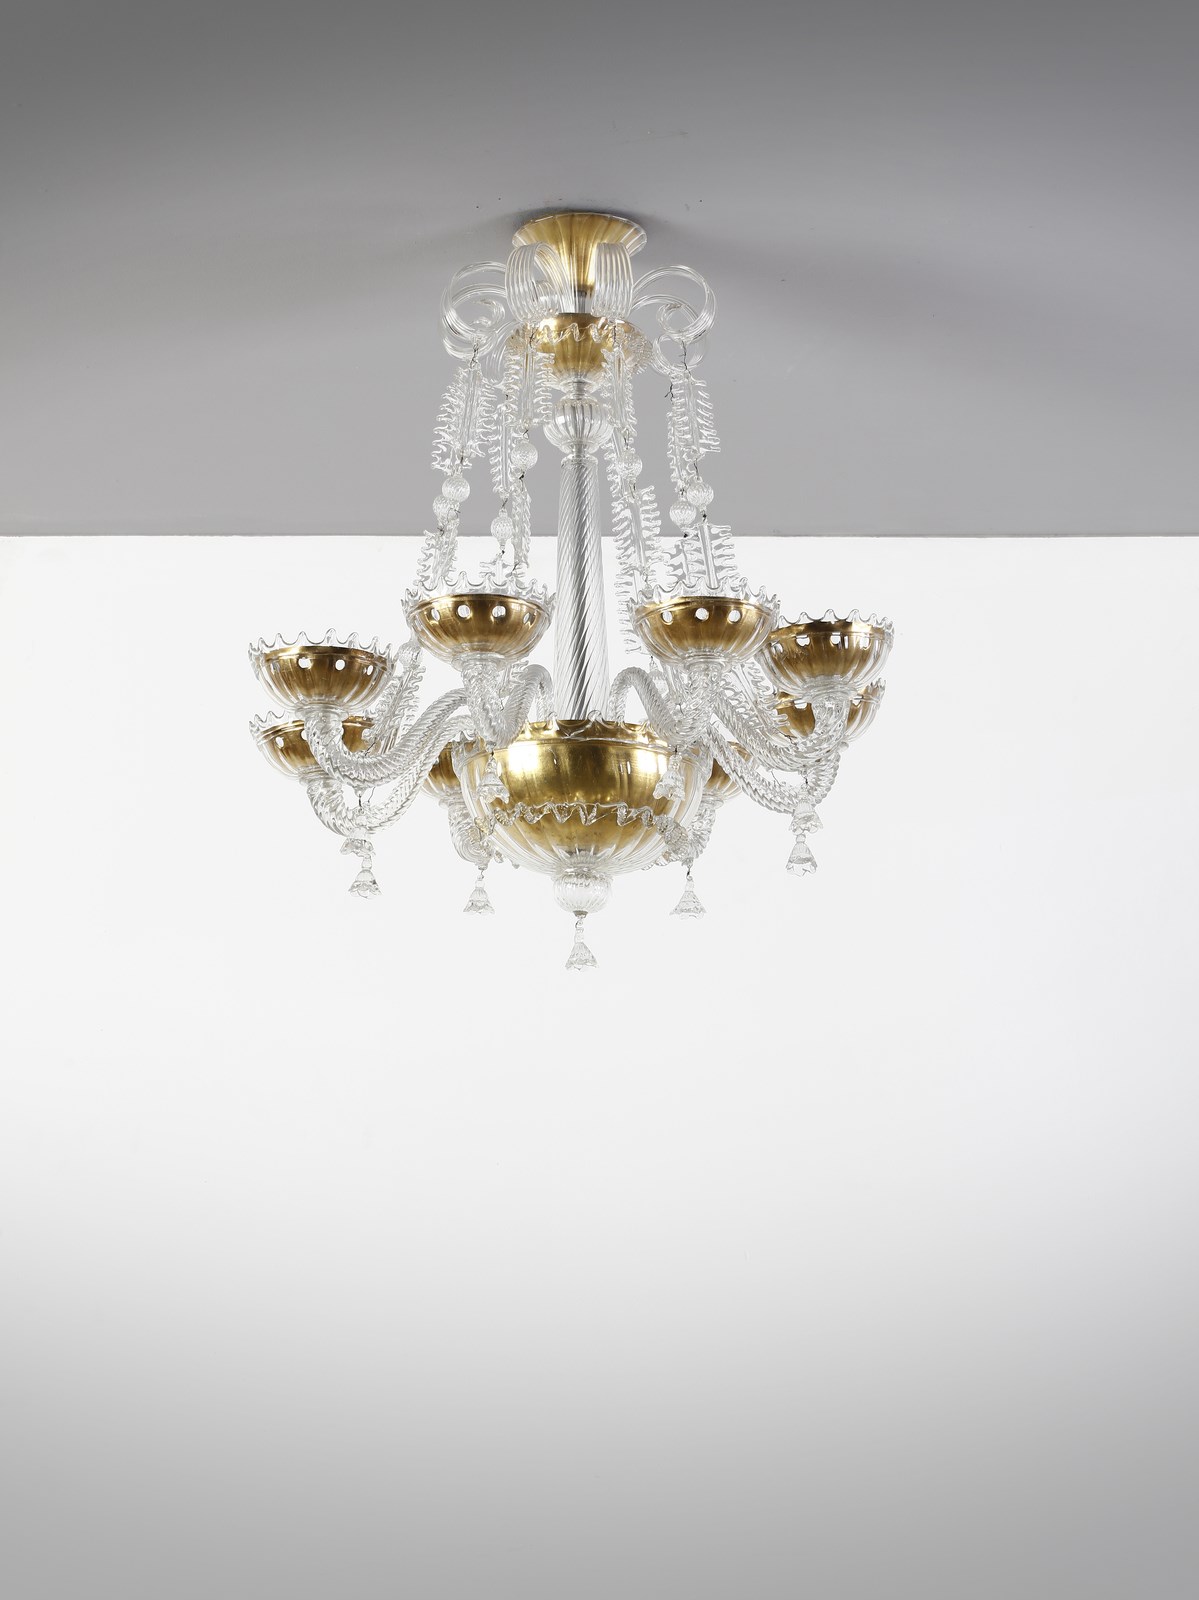 Ceiling lamp (Barovier & Toso )